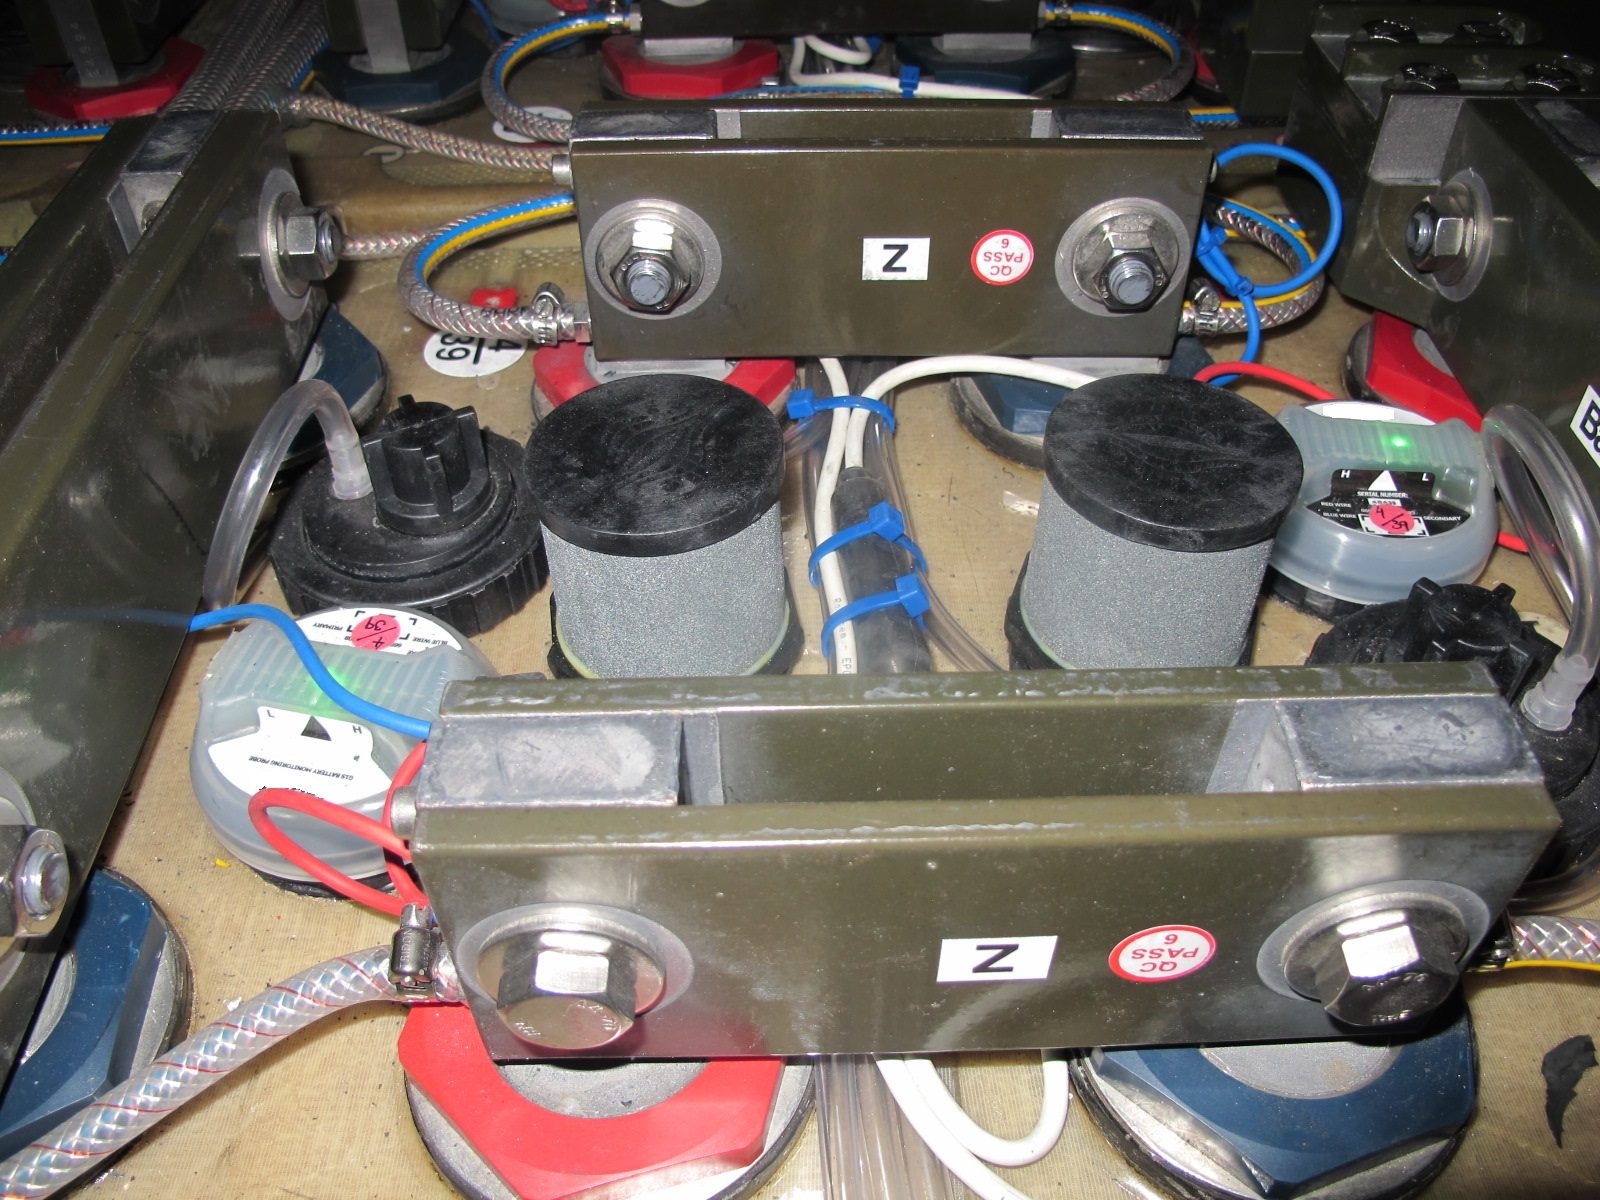 Vent Plugs fitted to Lead Acid Batteries supplied to the Royal Australian Navy (RAN).